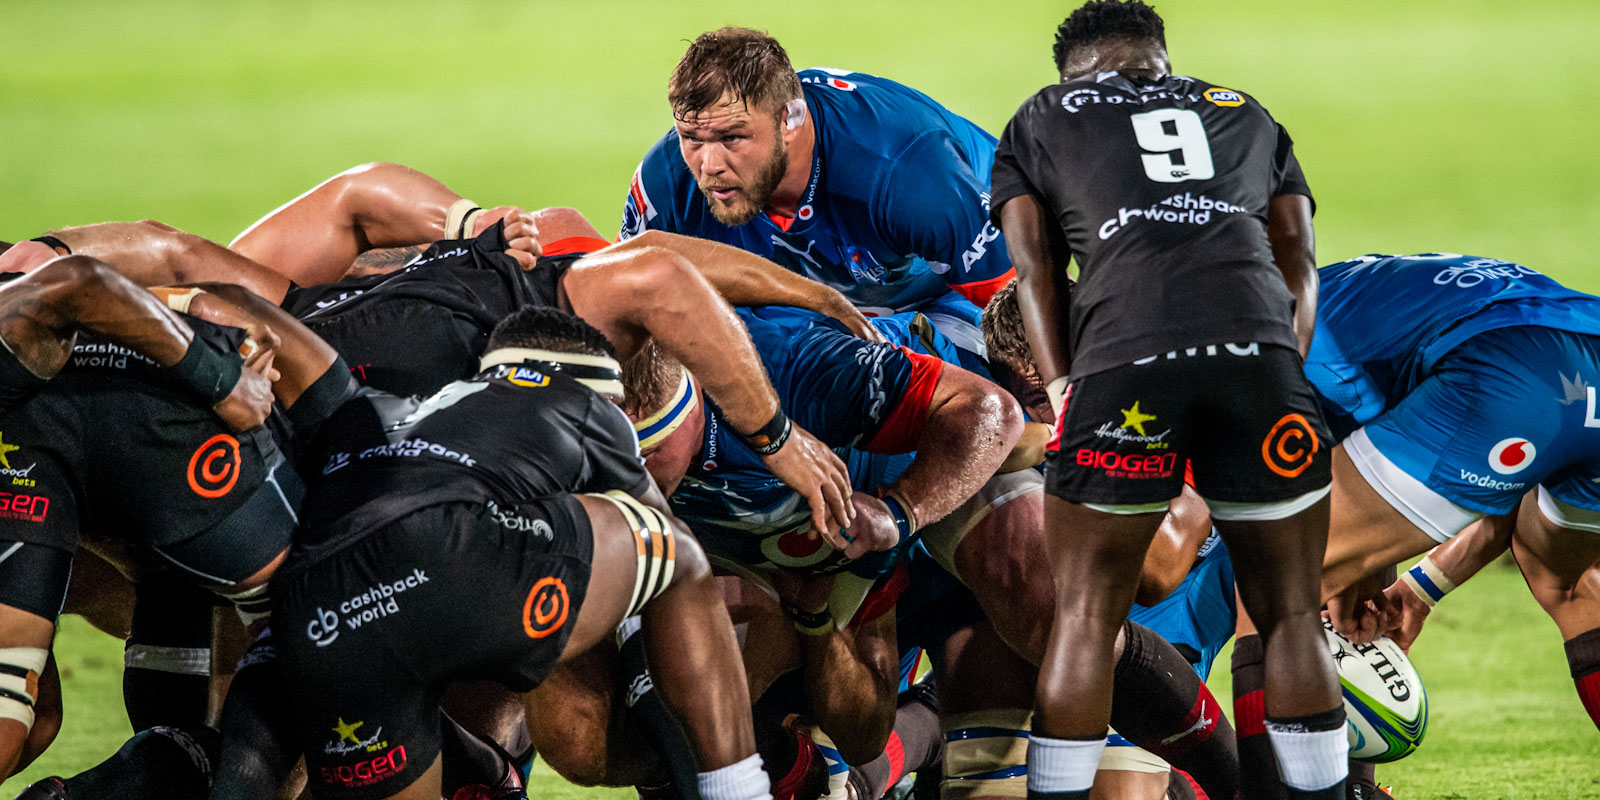 Duane Vermeulen was named Man of the Match.